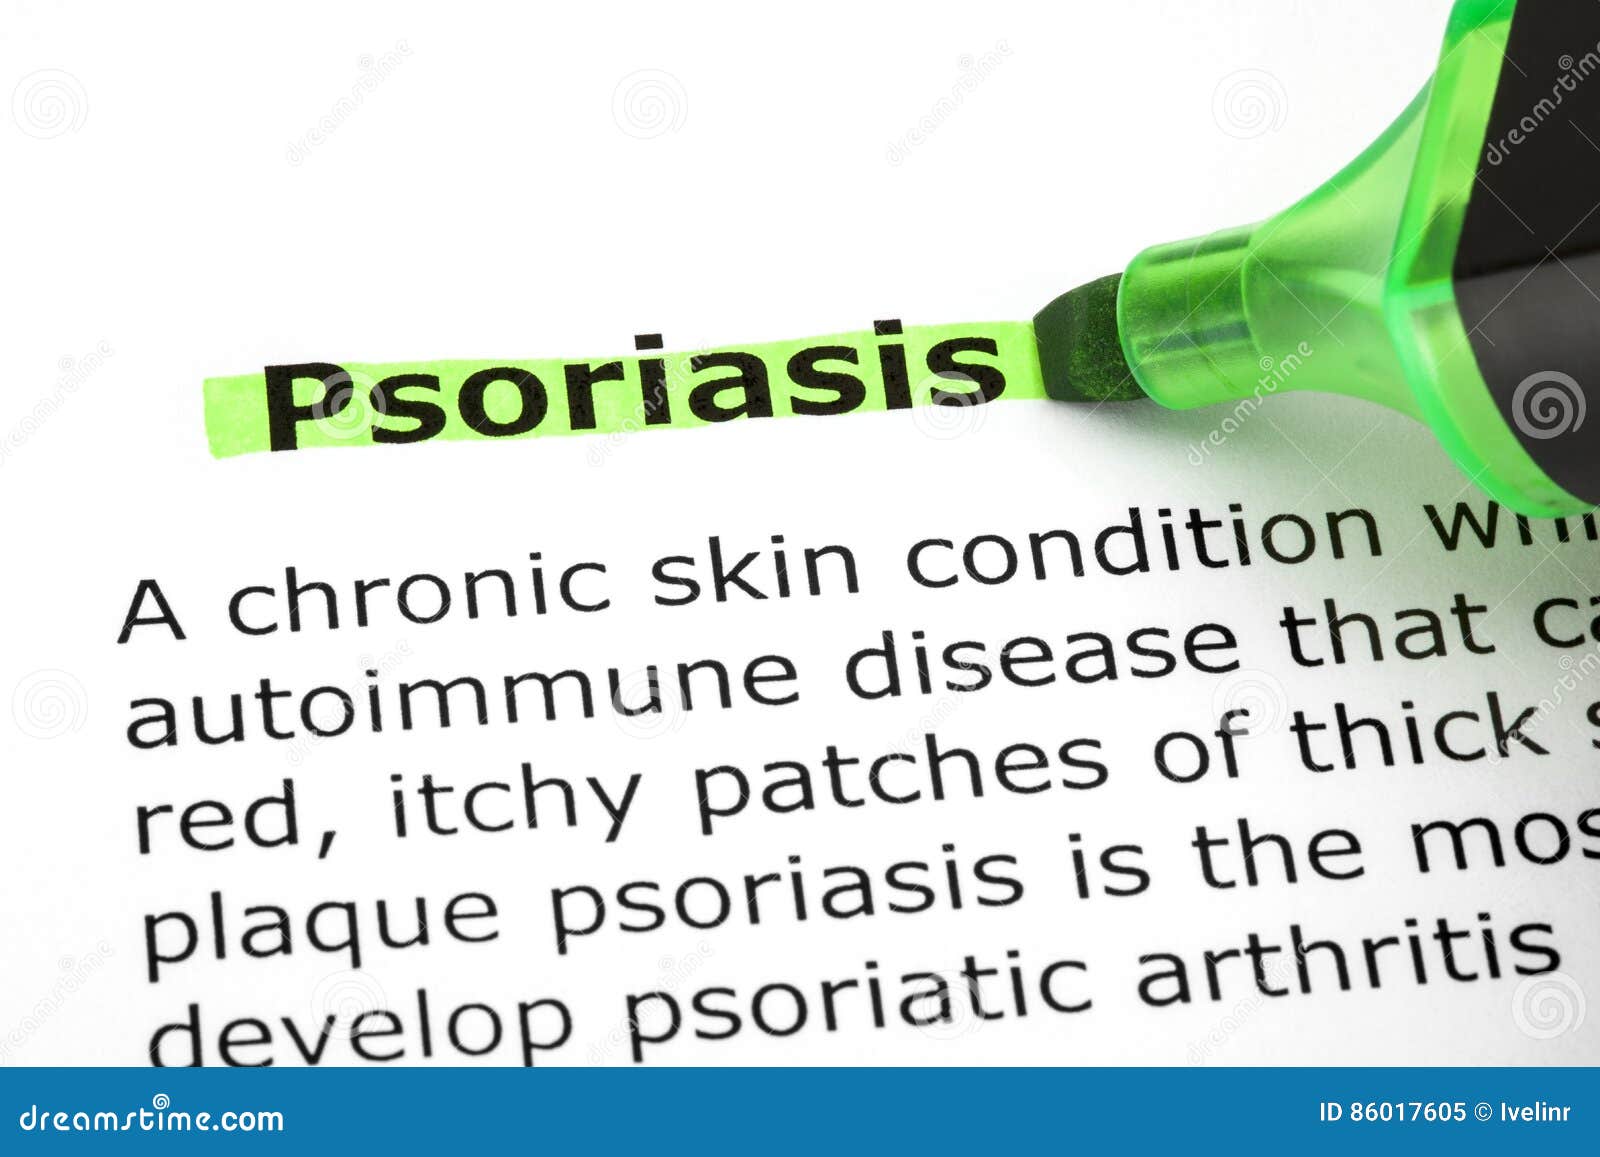 psoriasis highlighted with green marker